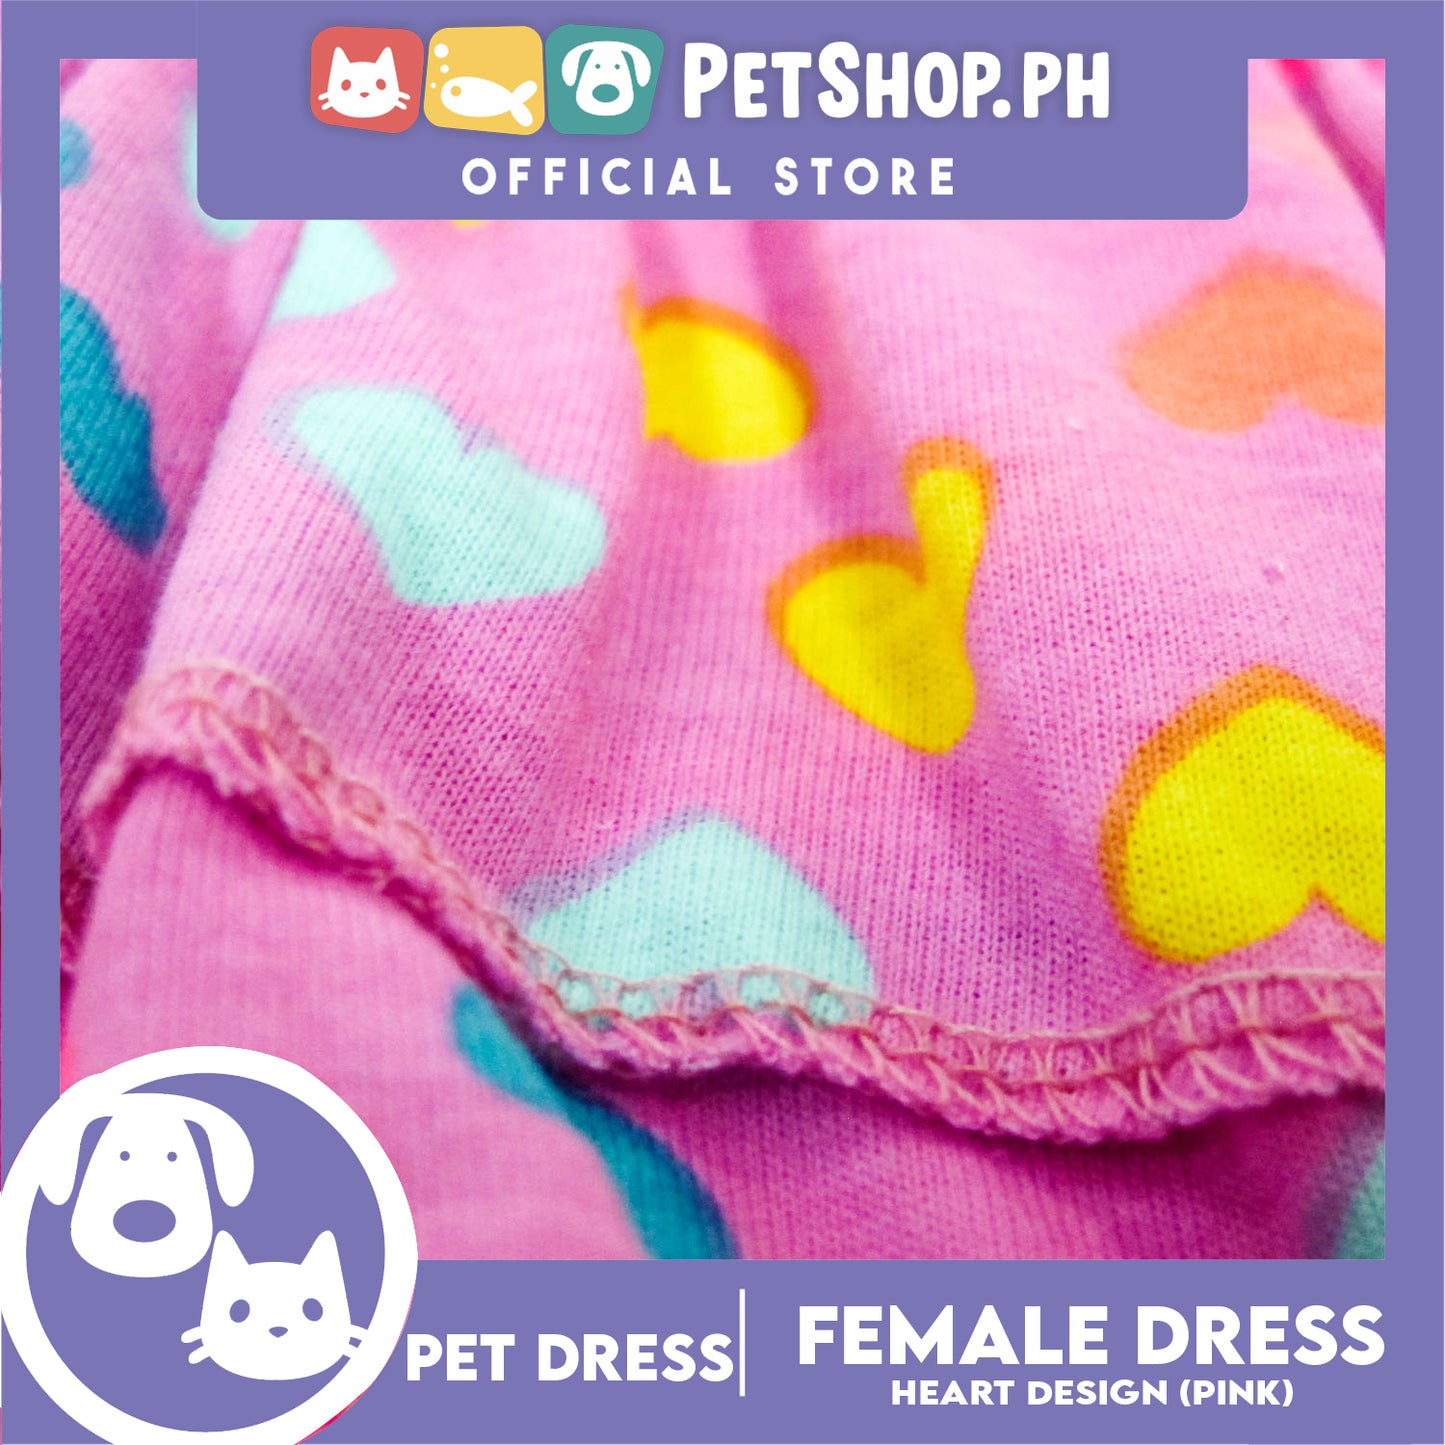 Pet Shirt Purple Dress Sando Shirt with Heart Design (Large) Perfect Fit for Dogs and Cats Cloth